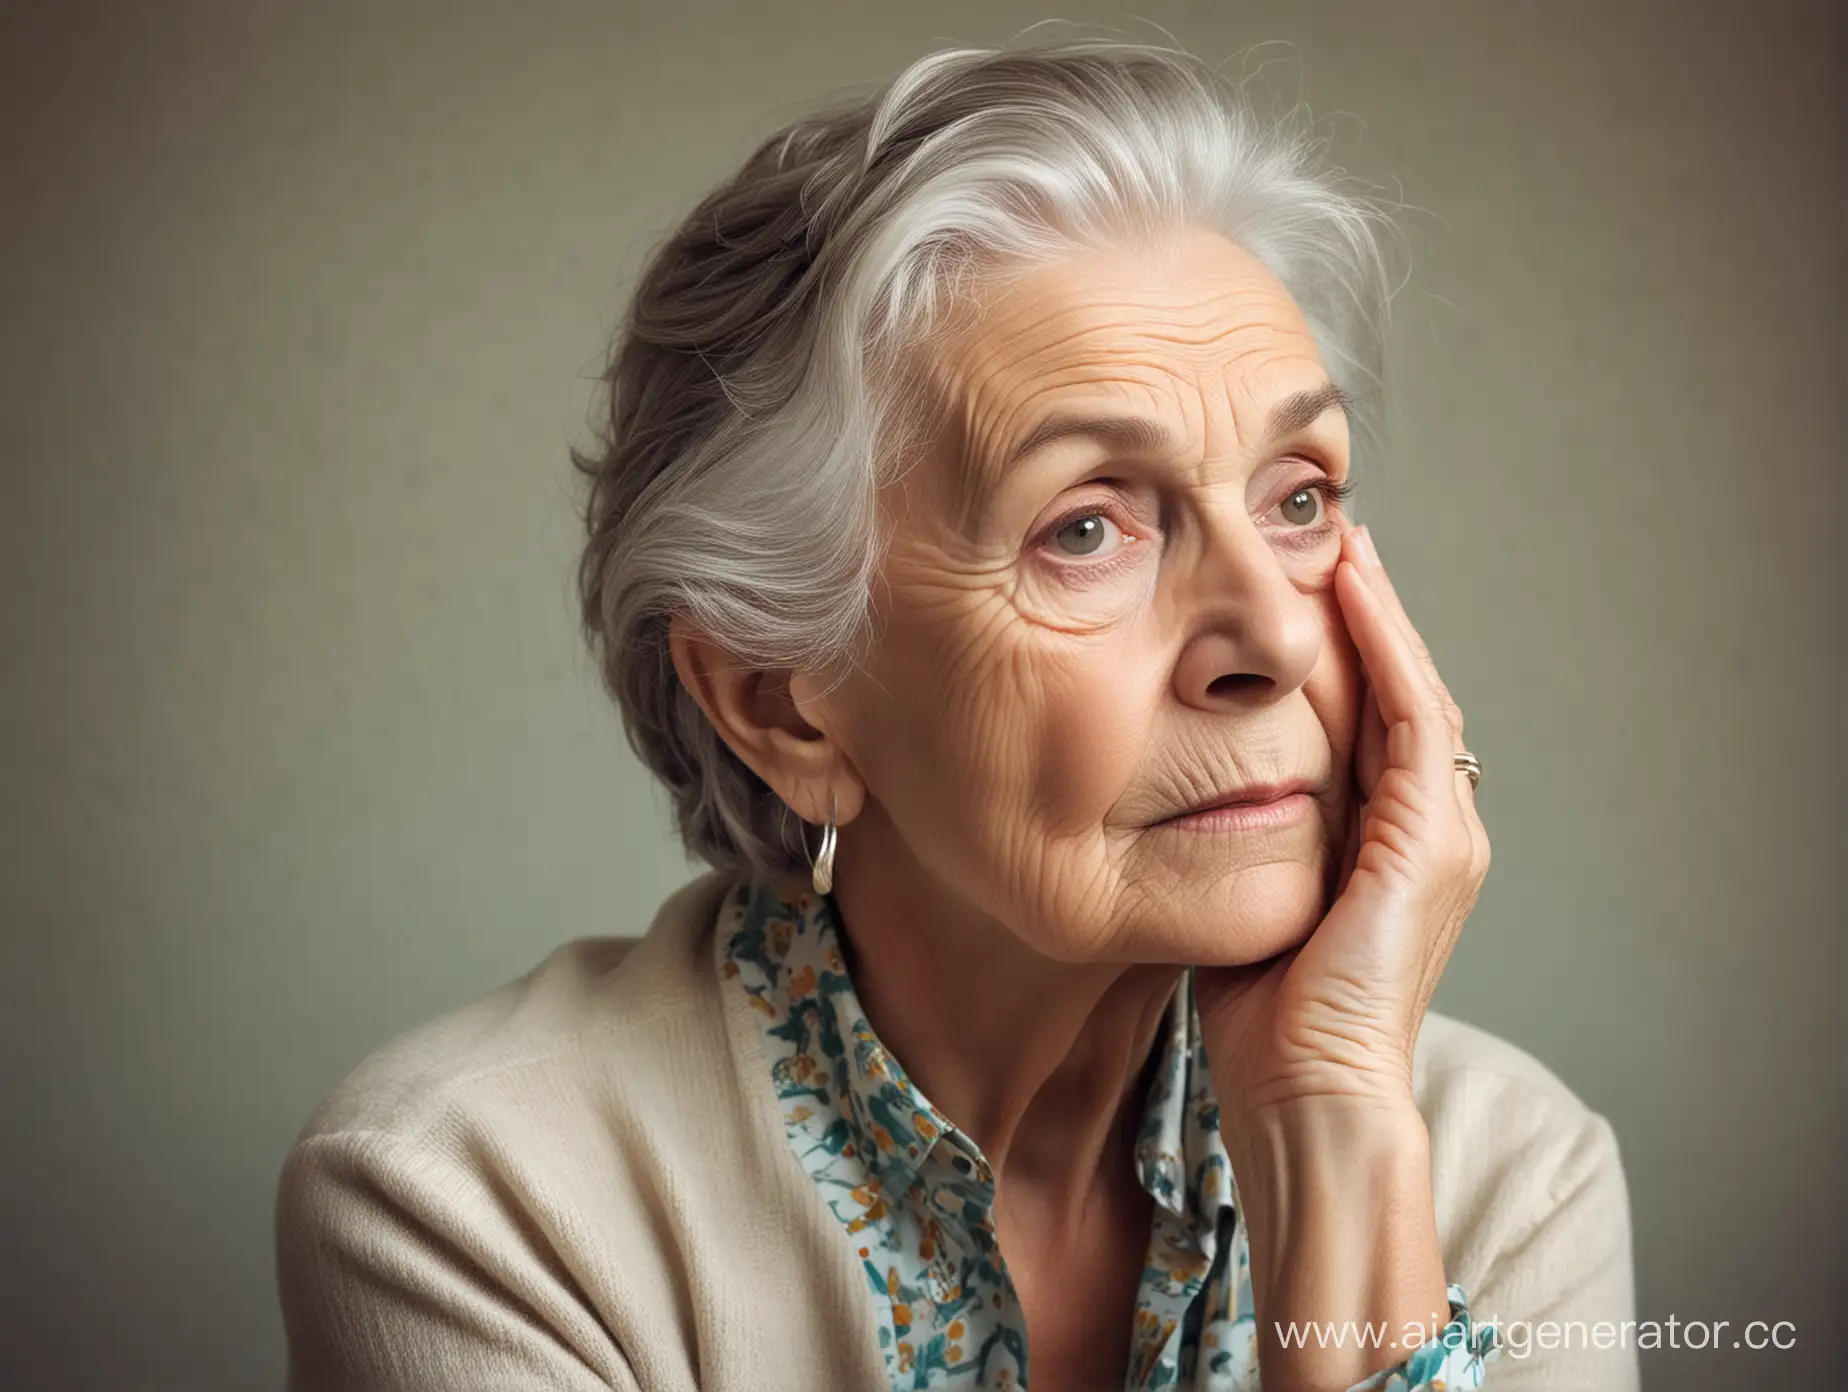 An elderly lady, once vibrant and active, now finds herself in a clear geriatric case. Senility has crept in, affecting her brain to the point where she's often confused and forgetful.